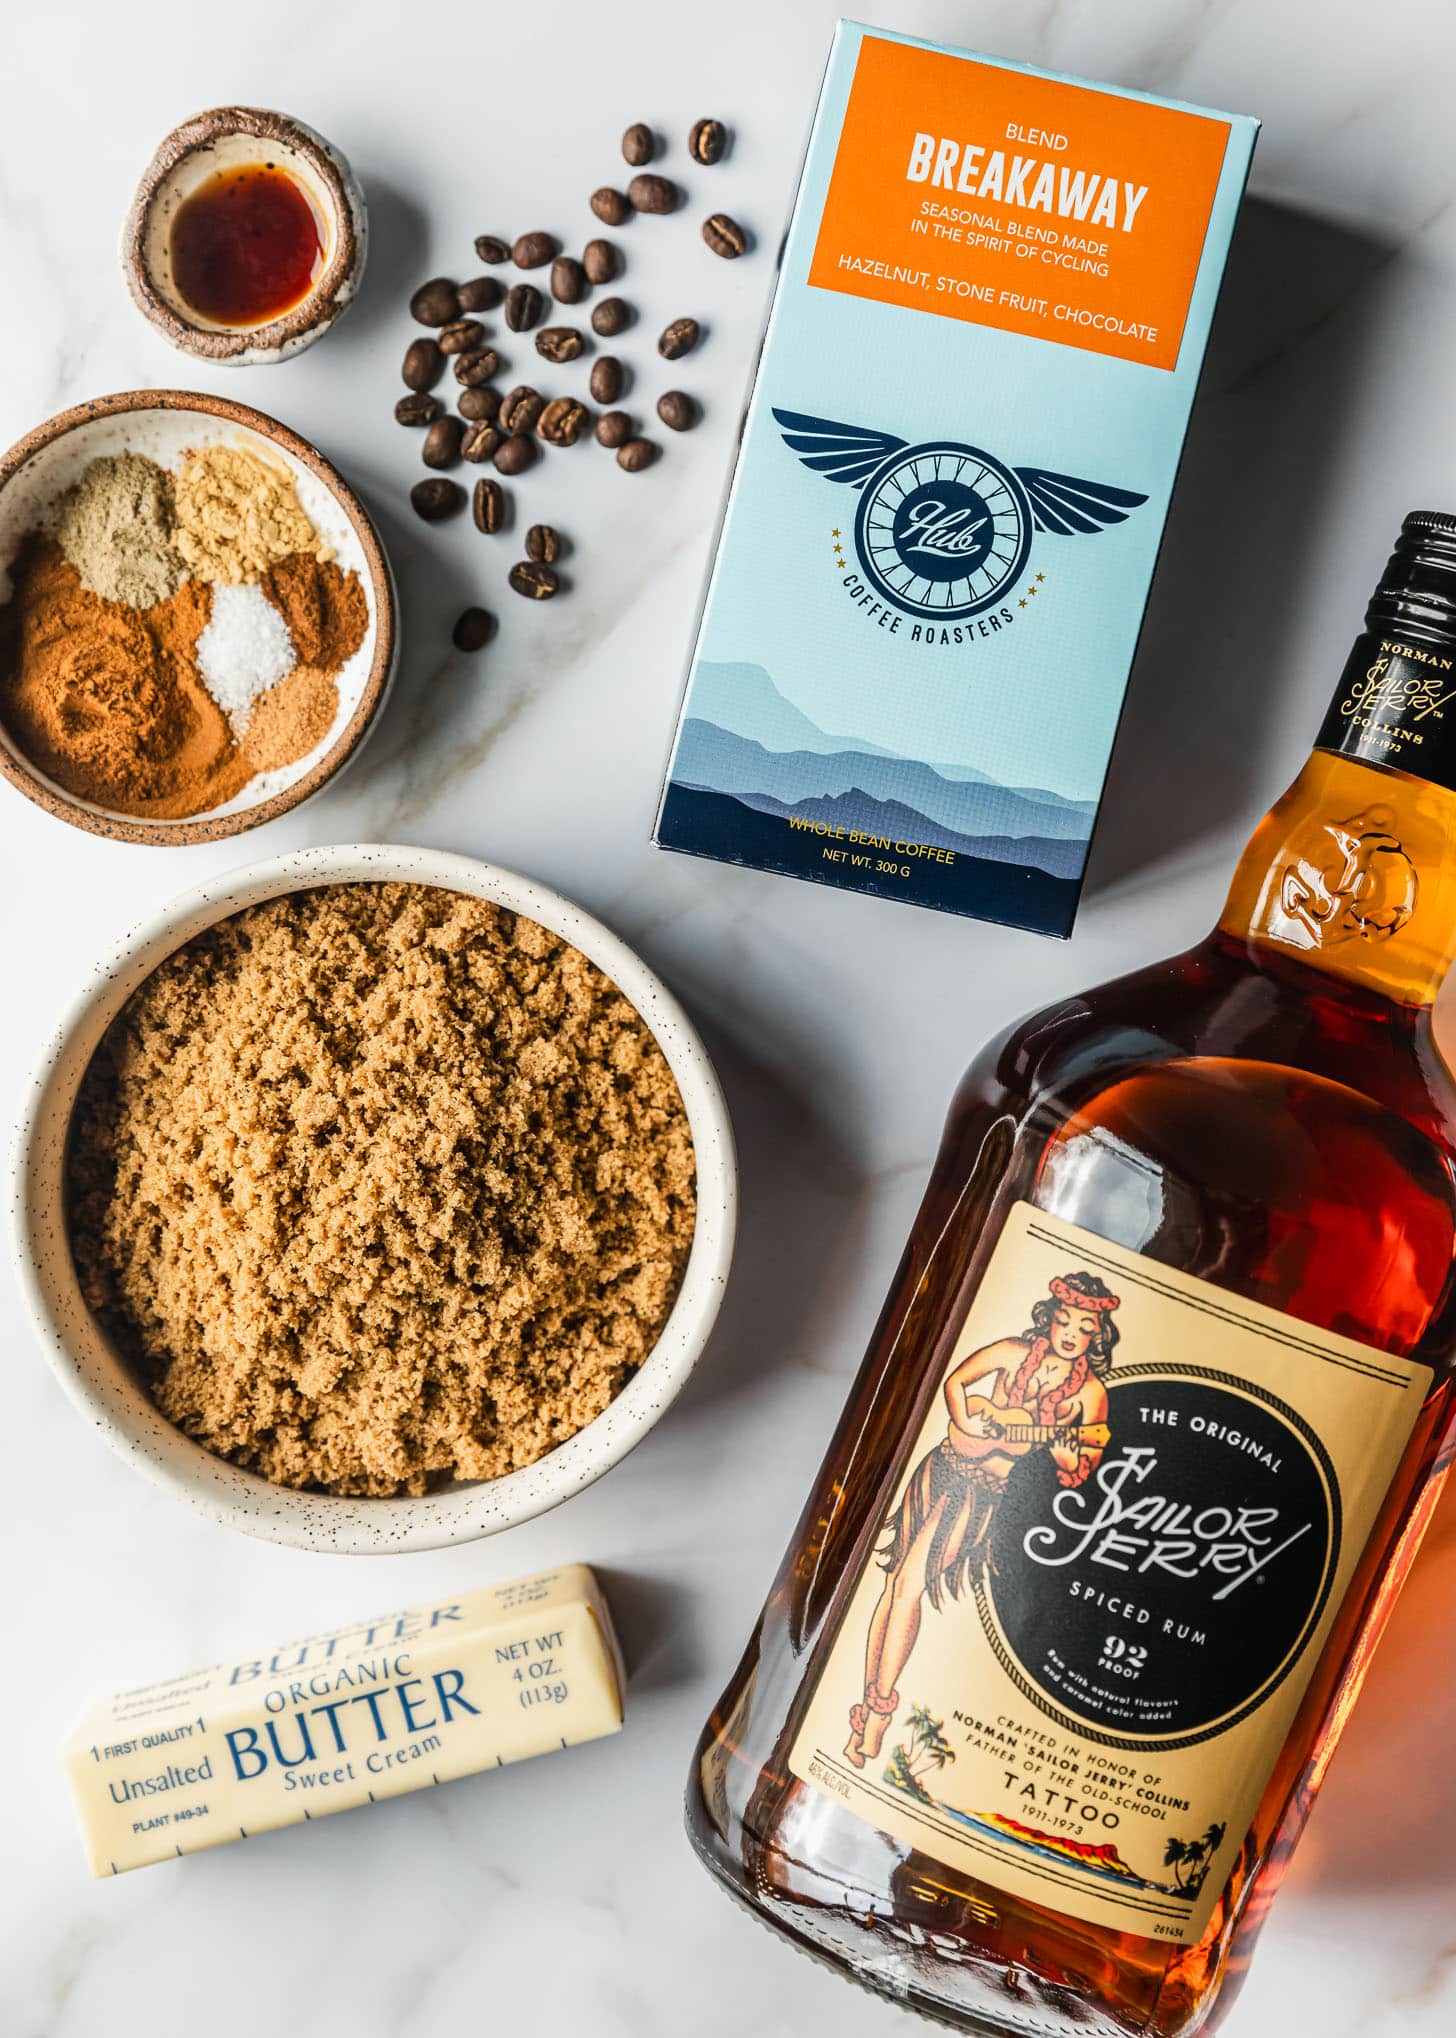 A bottle of rum, stick of butter, and box of coffee next to brown bowls of brown sugar, spices, and vanilla on a white marble counter.